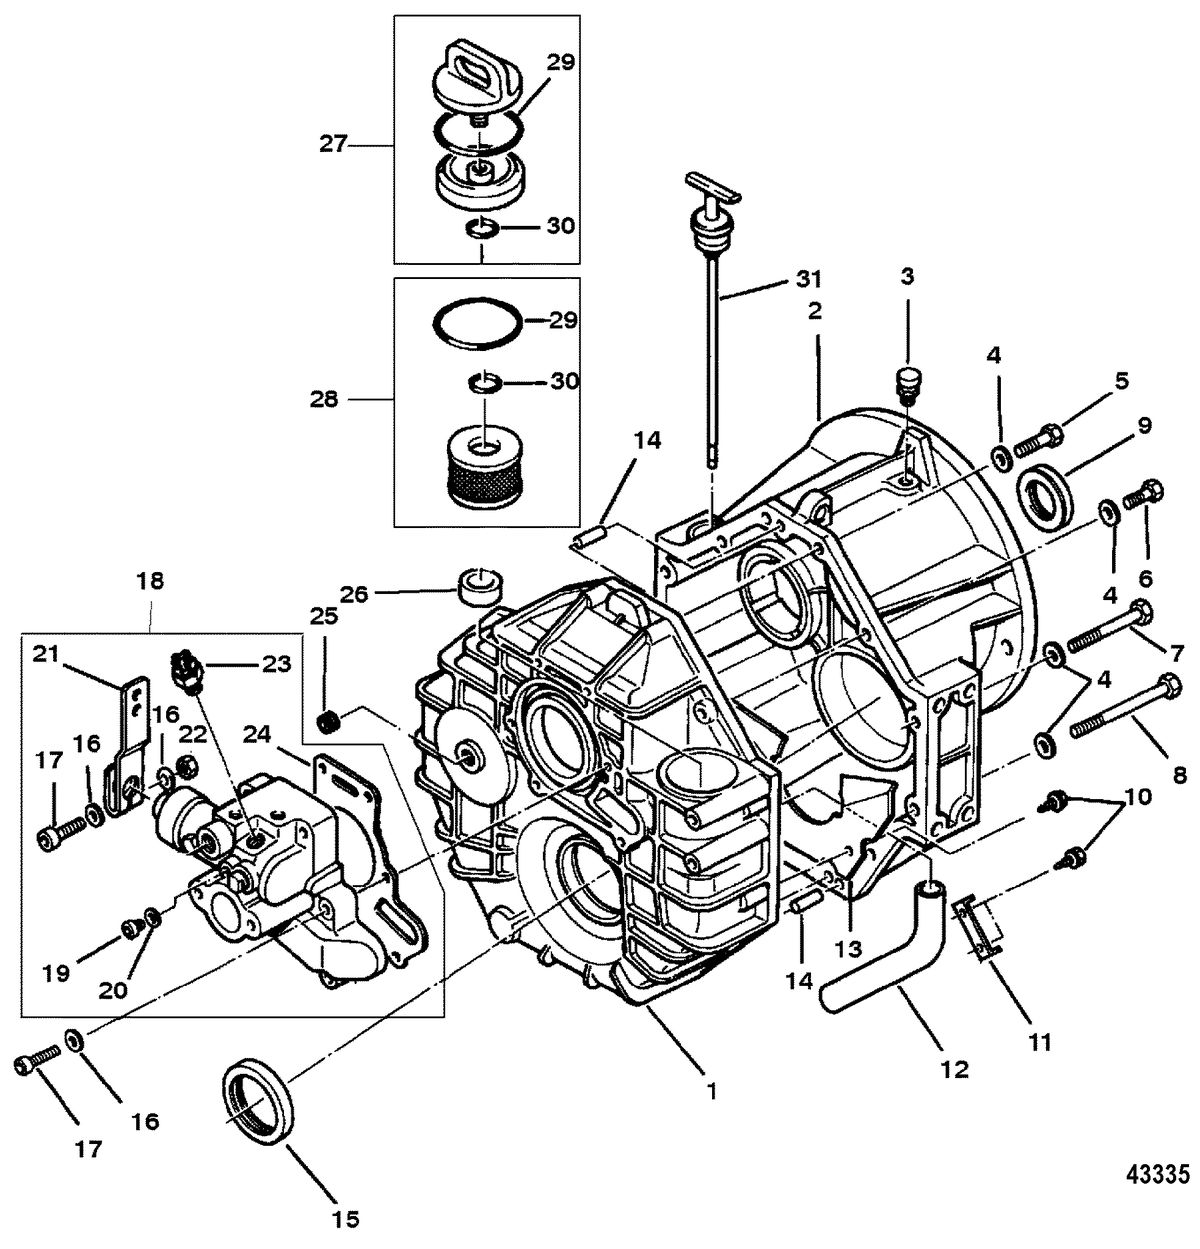 MERCRUISER D4.2L/220 IDI DIESEL Transmission(Direct Drive)(Inboard) Page 1 of 2